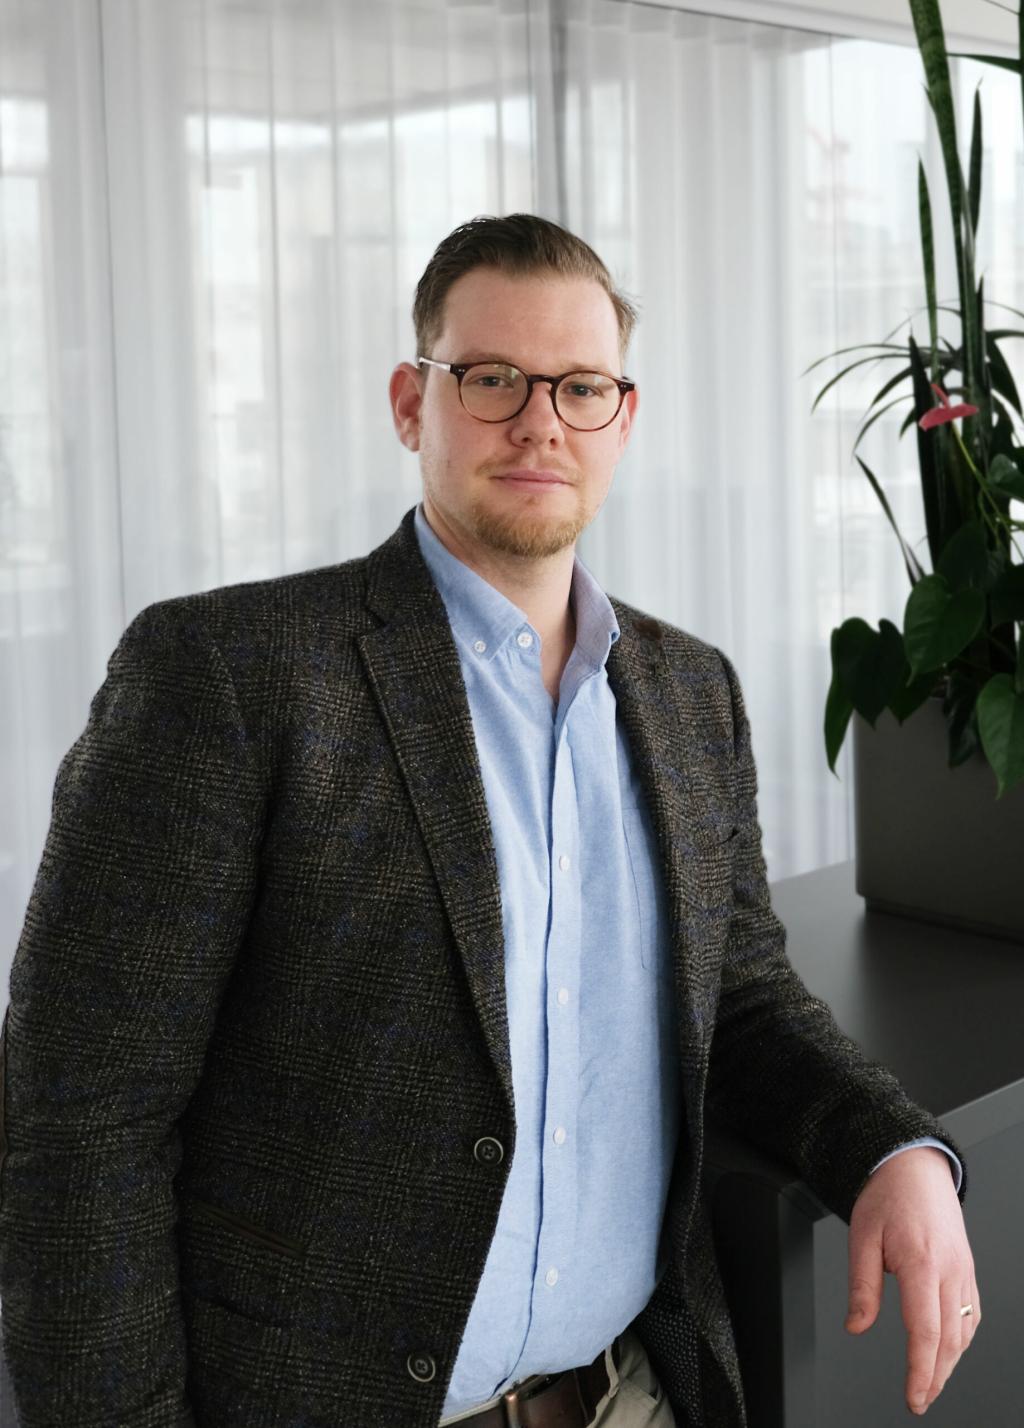 Ulrich Käser moves to XPay